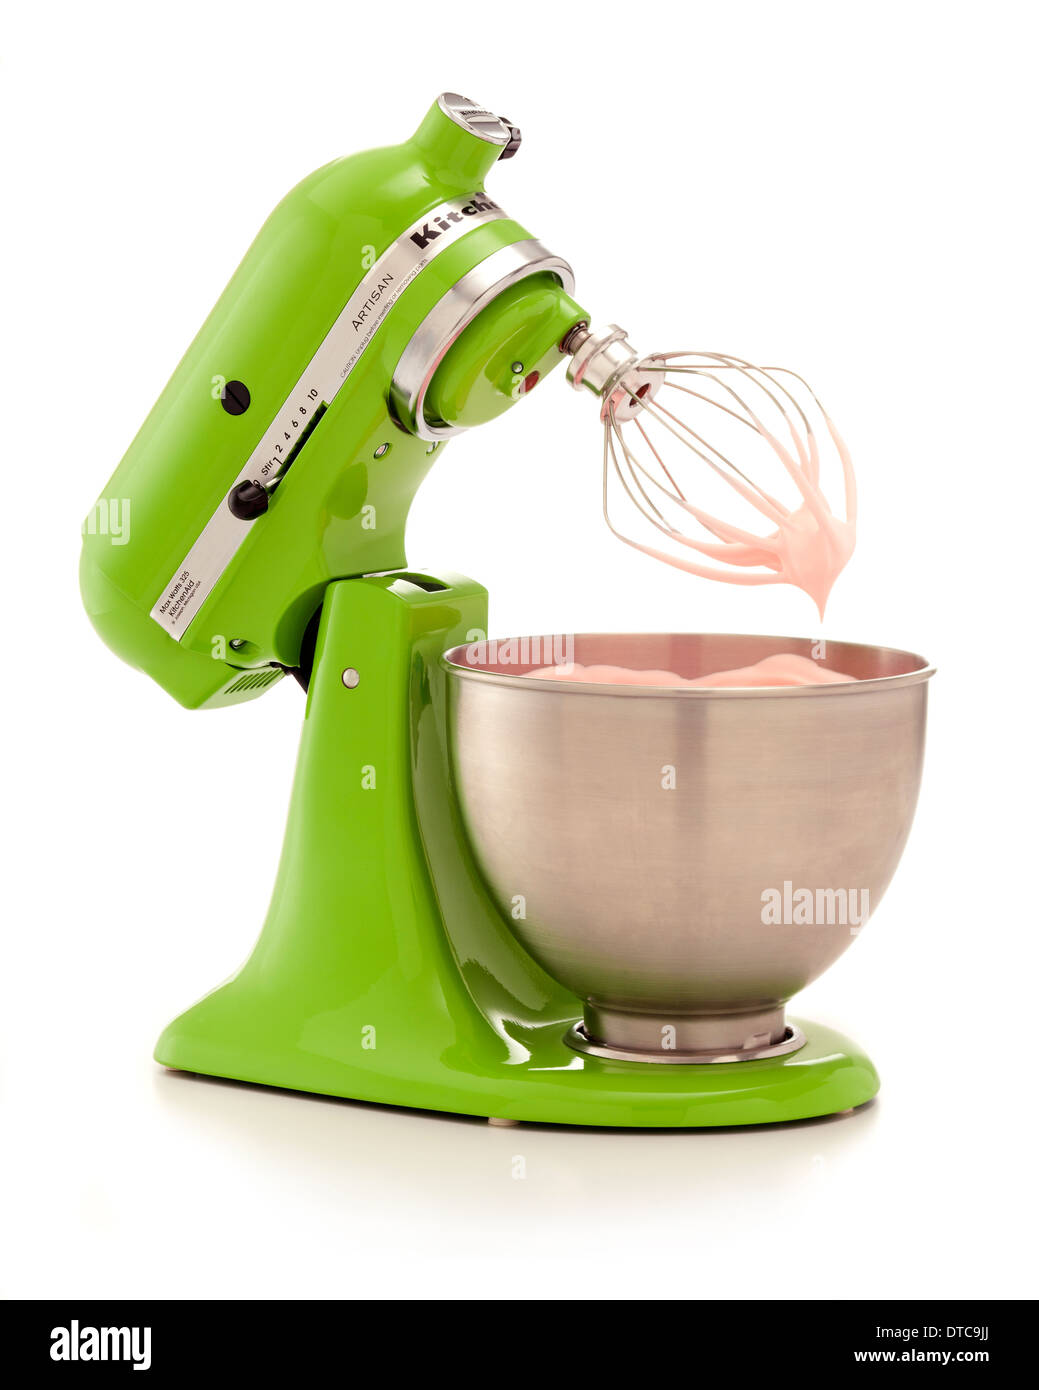 https://c8.alamy.com/comp/DTC9JJ/green-kitchenaid-mixer-with-a-bowl-of-pink-icing-that-was-just-made-DTC9JJ.jpg